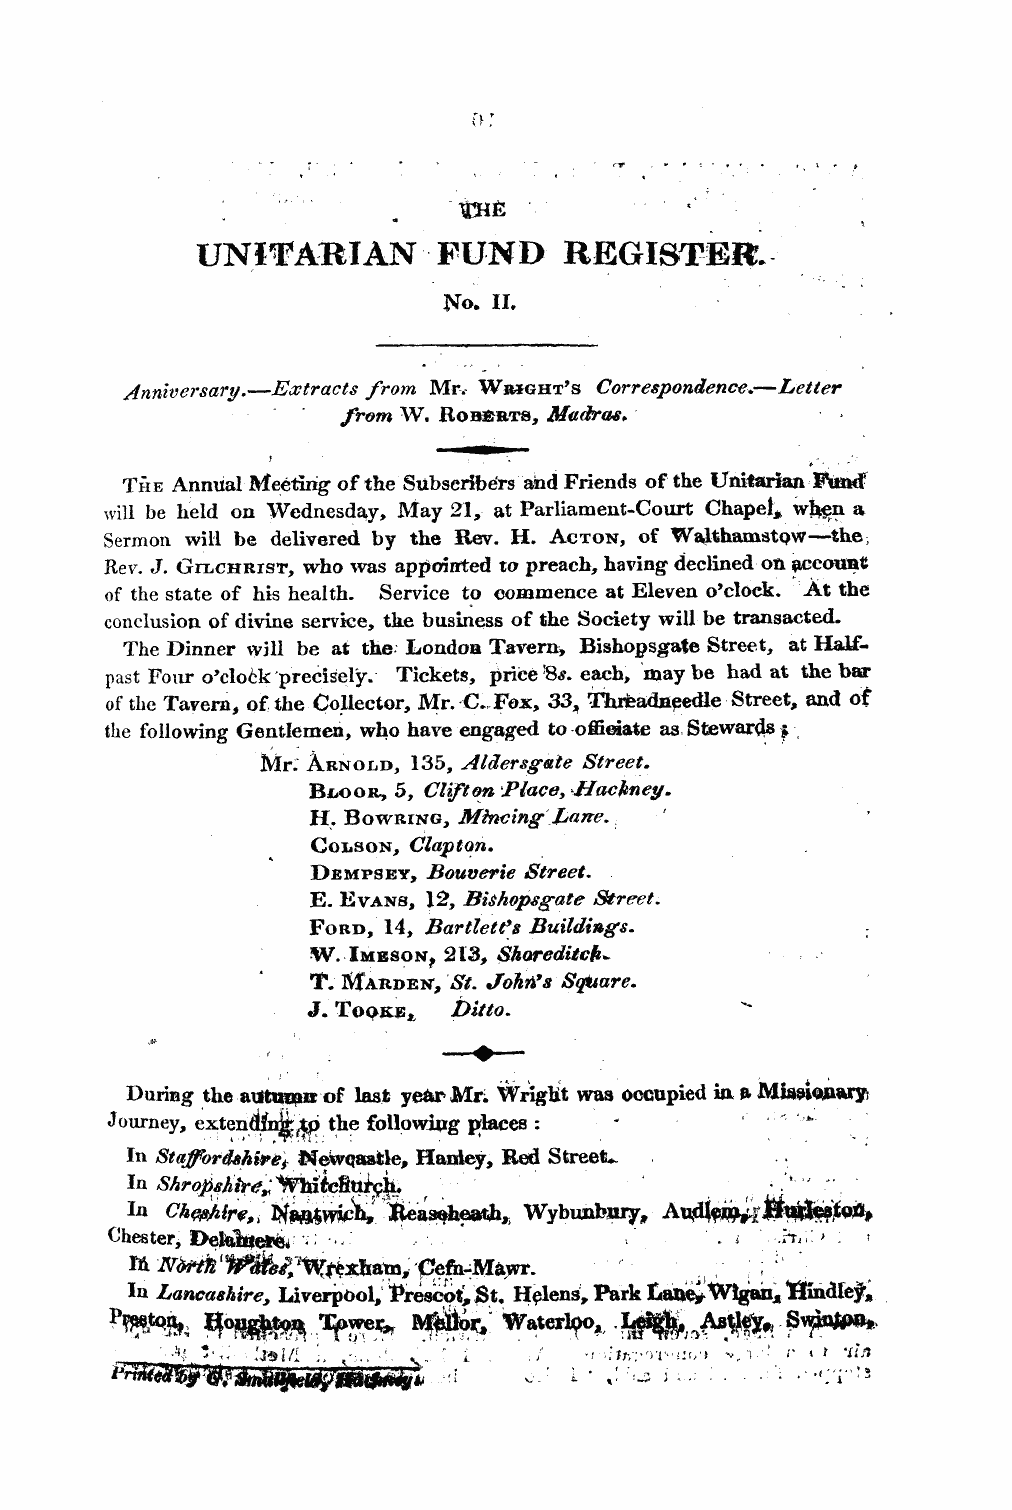 Monthly Repository (1806-1838) and Unitarian Chronicle (1832-1833): F Y, 1st edition, Supplement - Anniversary.—Extracts From Mr. Wbjght's Correspondence.—Letter From W, Roberts, Madras.